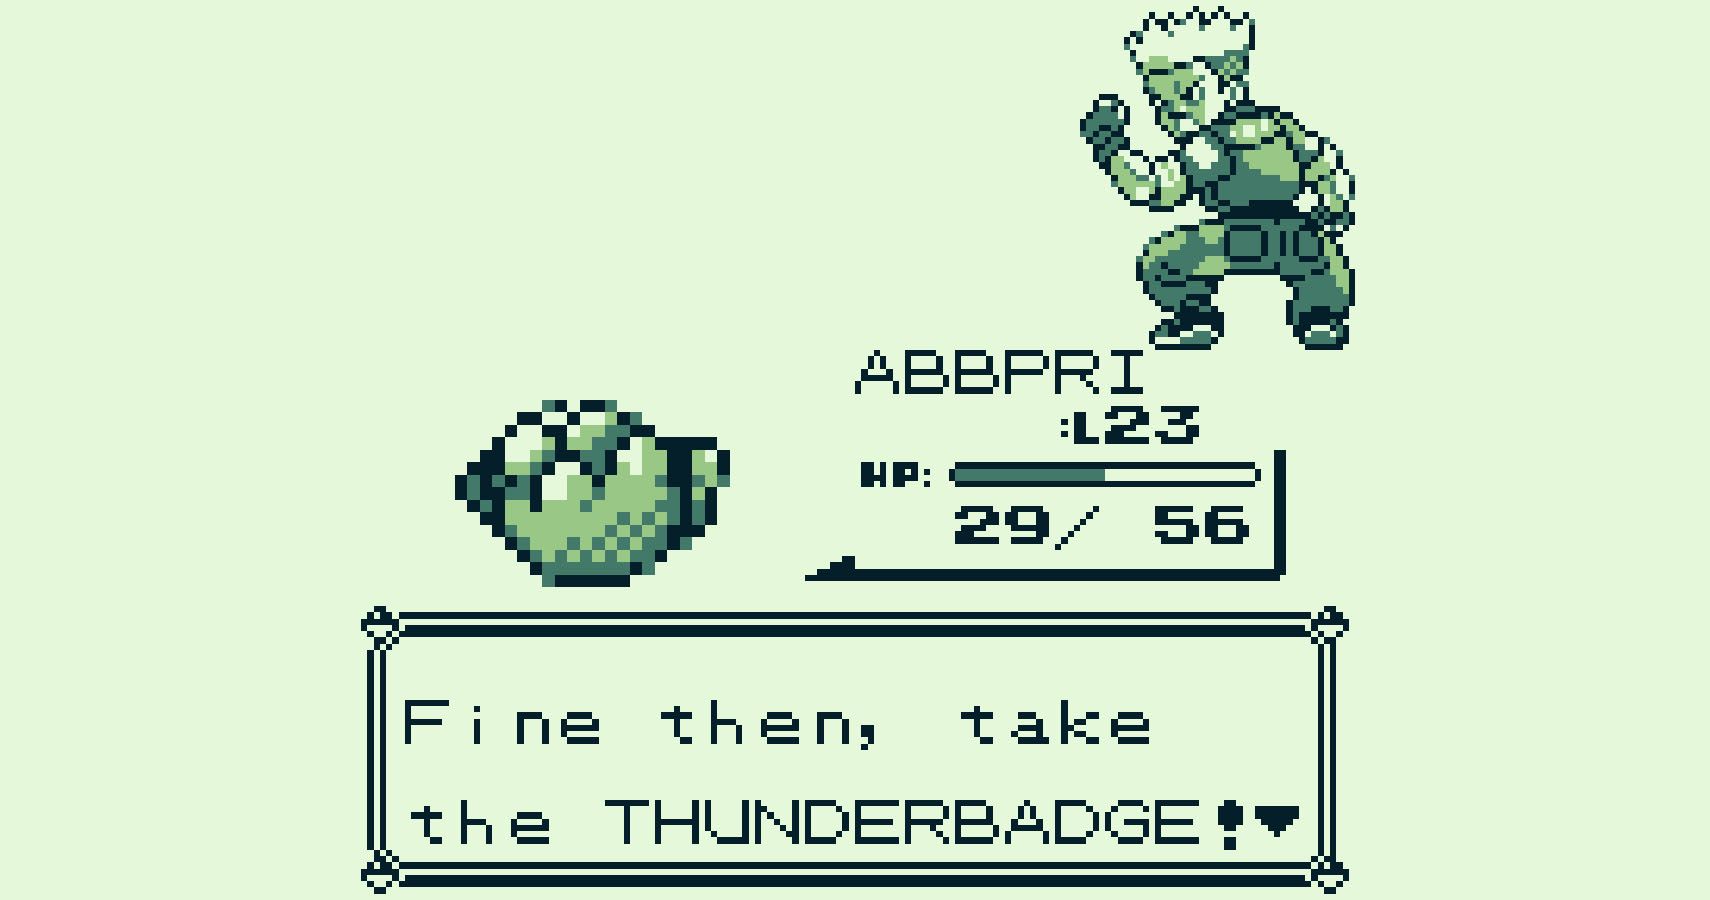 Screenshot of the moment that Twitter collectively won the Thunderbadge in Pokemon Red